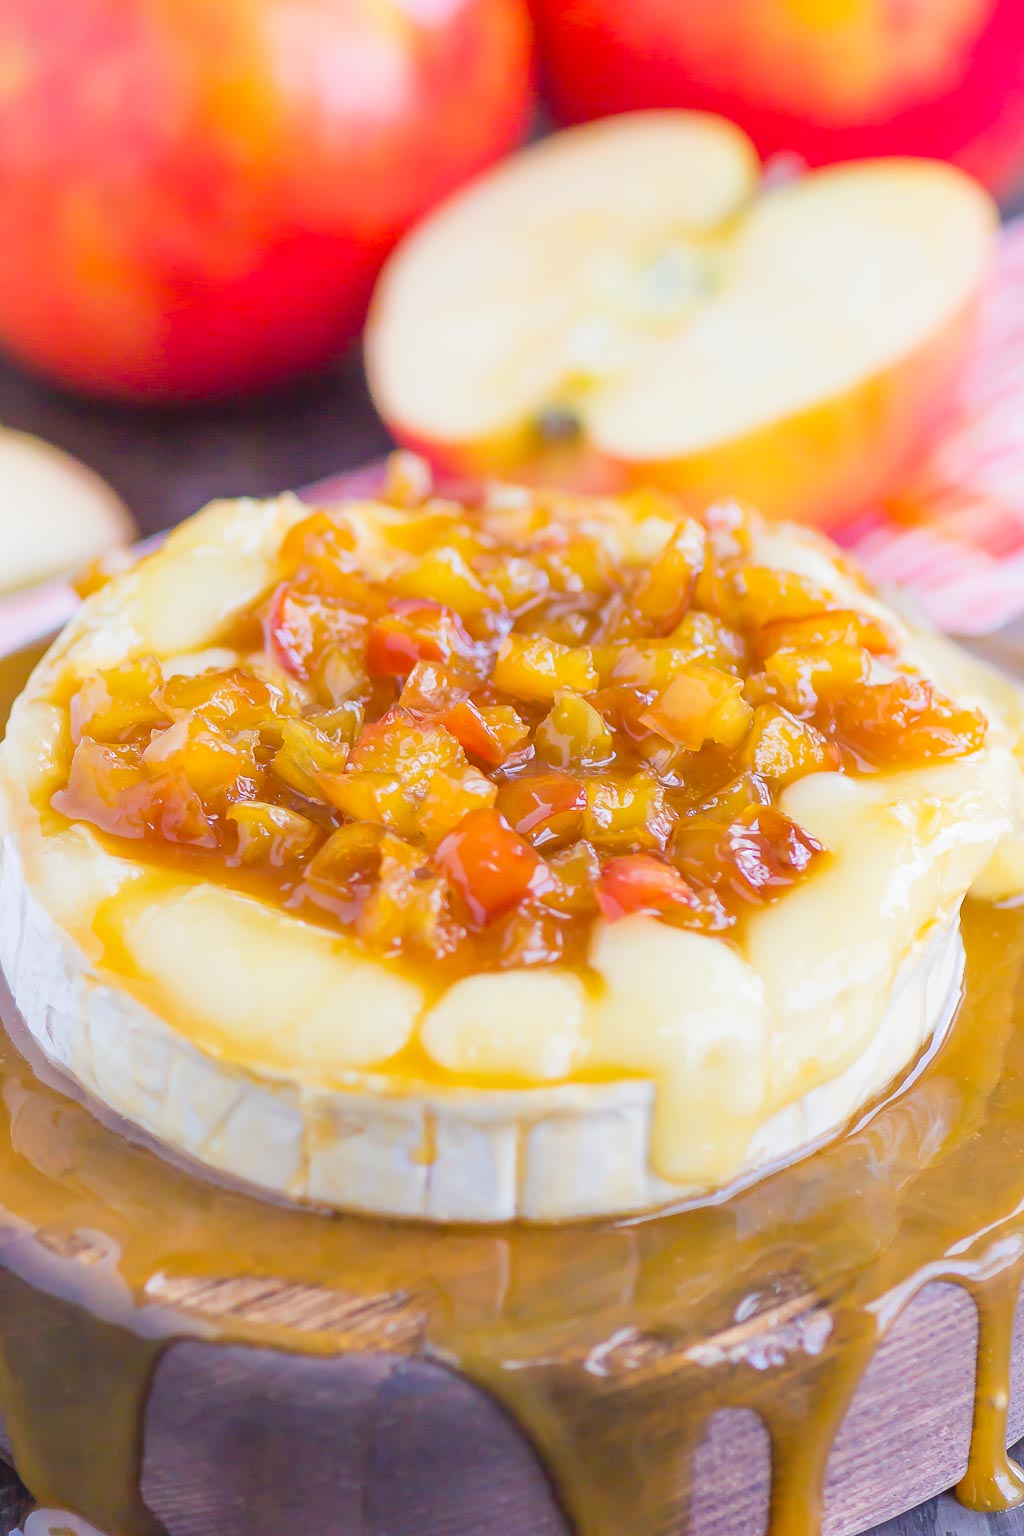 Caramel Apple Baked Brie is an easy appetizer that's ready in just 10 minutes. Fresh apples are sautÃ©ed in a buttery brown sugar mixture, drizzled with caramel, and then added to the melty brie. Perfect to serve with pita chips or apple slices, this gooey cheese is guaranteed to be a hit all year long! #brie #bakedbrie #caramel #apples #caramelapple #appetizer #brierecipe #fall recipe #fallappetizer #recipe